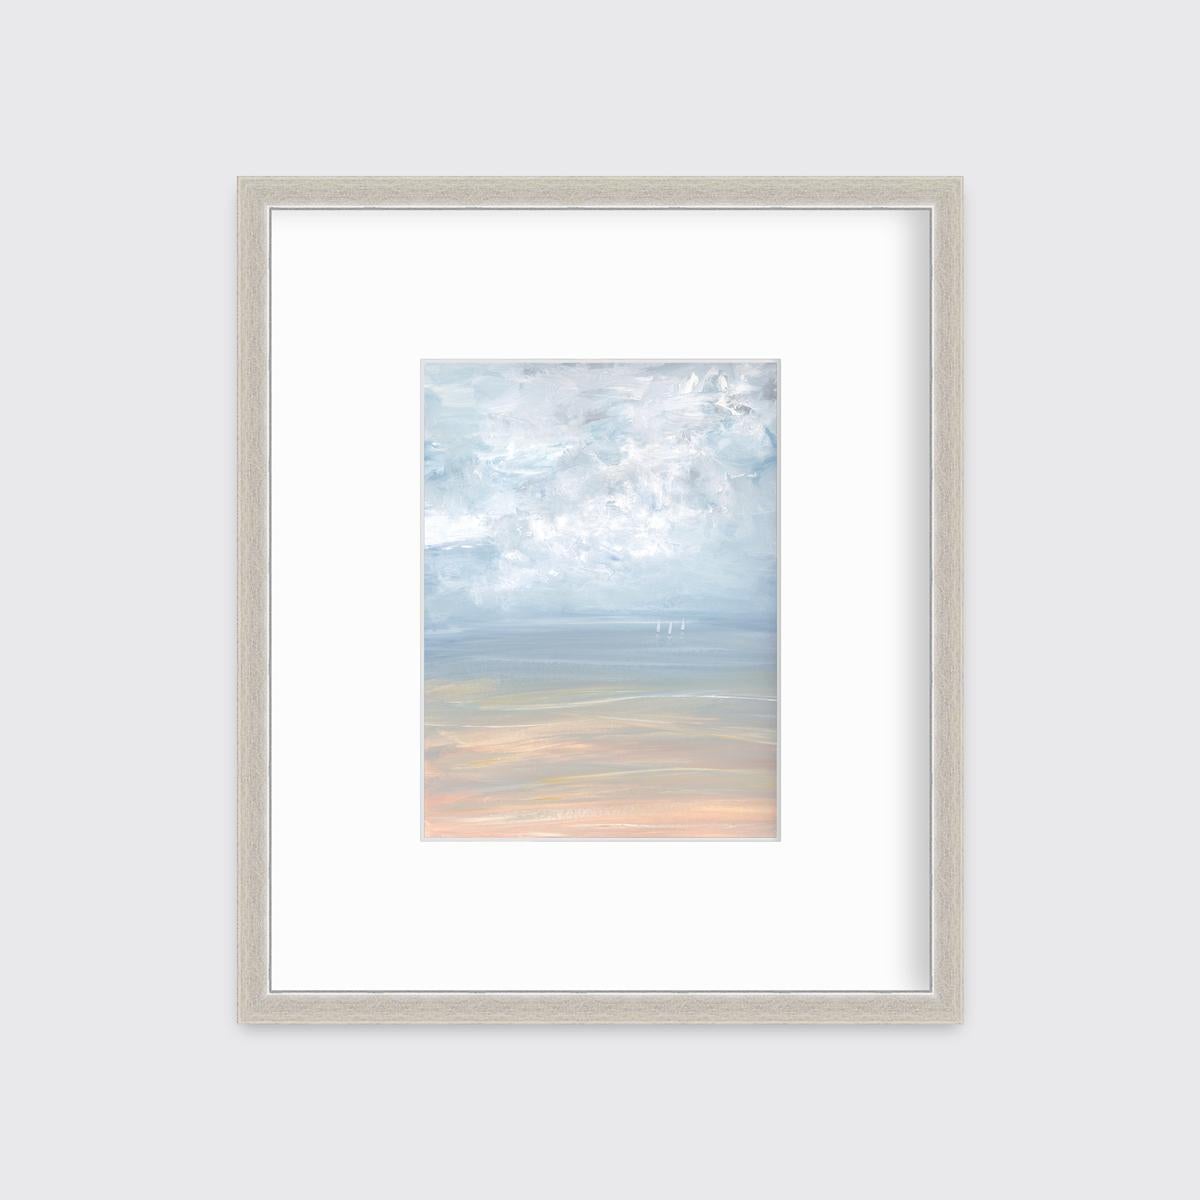 S. Cora Aldo Landscape Print - "Early Morning, " Framed Limited Edition Giclee Print, 20" x 15"